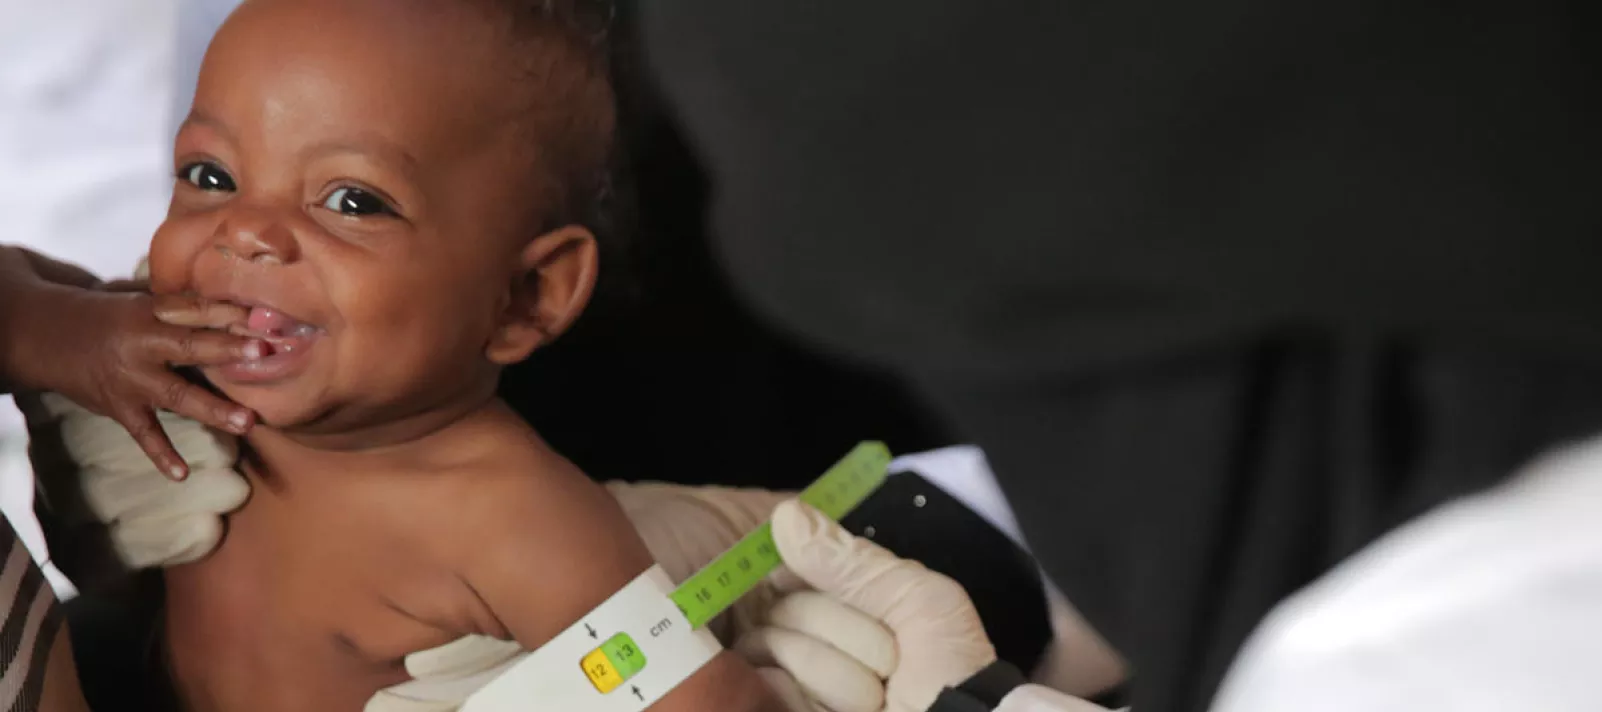 A baby is measured while being screened for severe acute malnutrition.